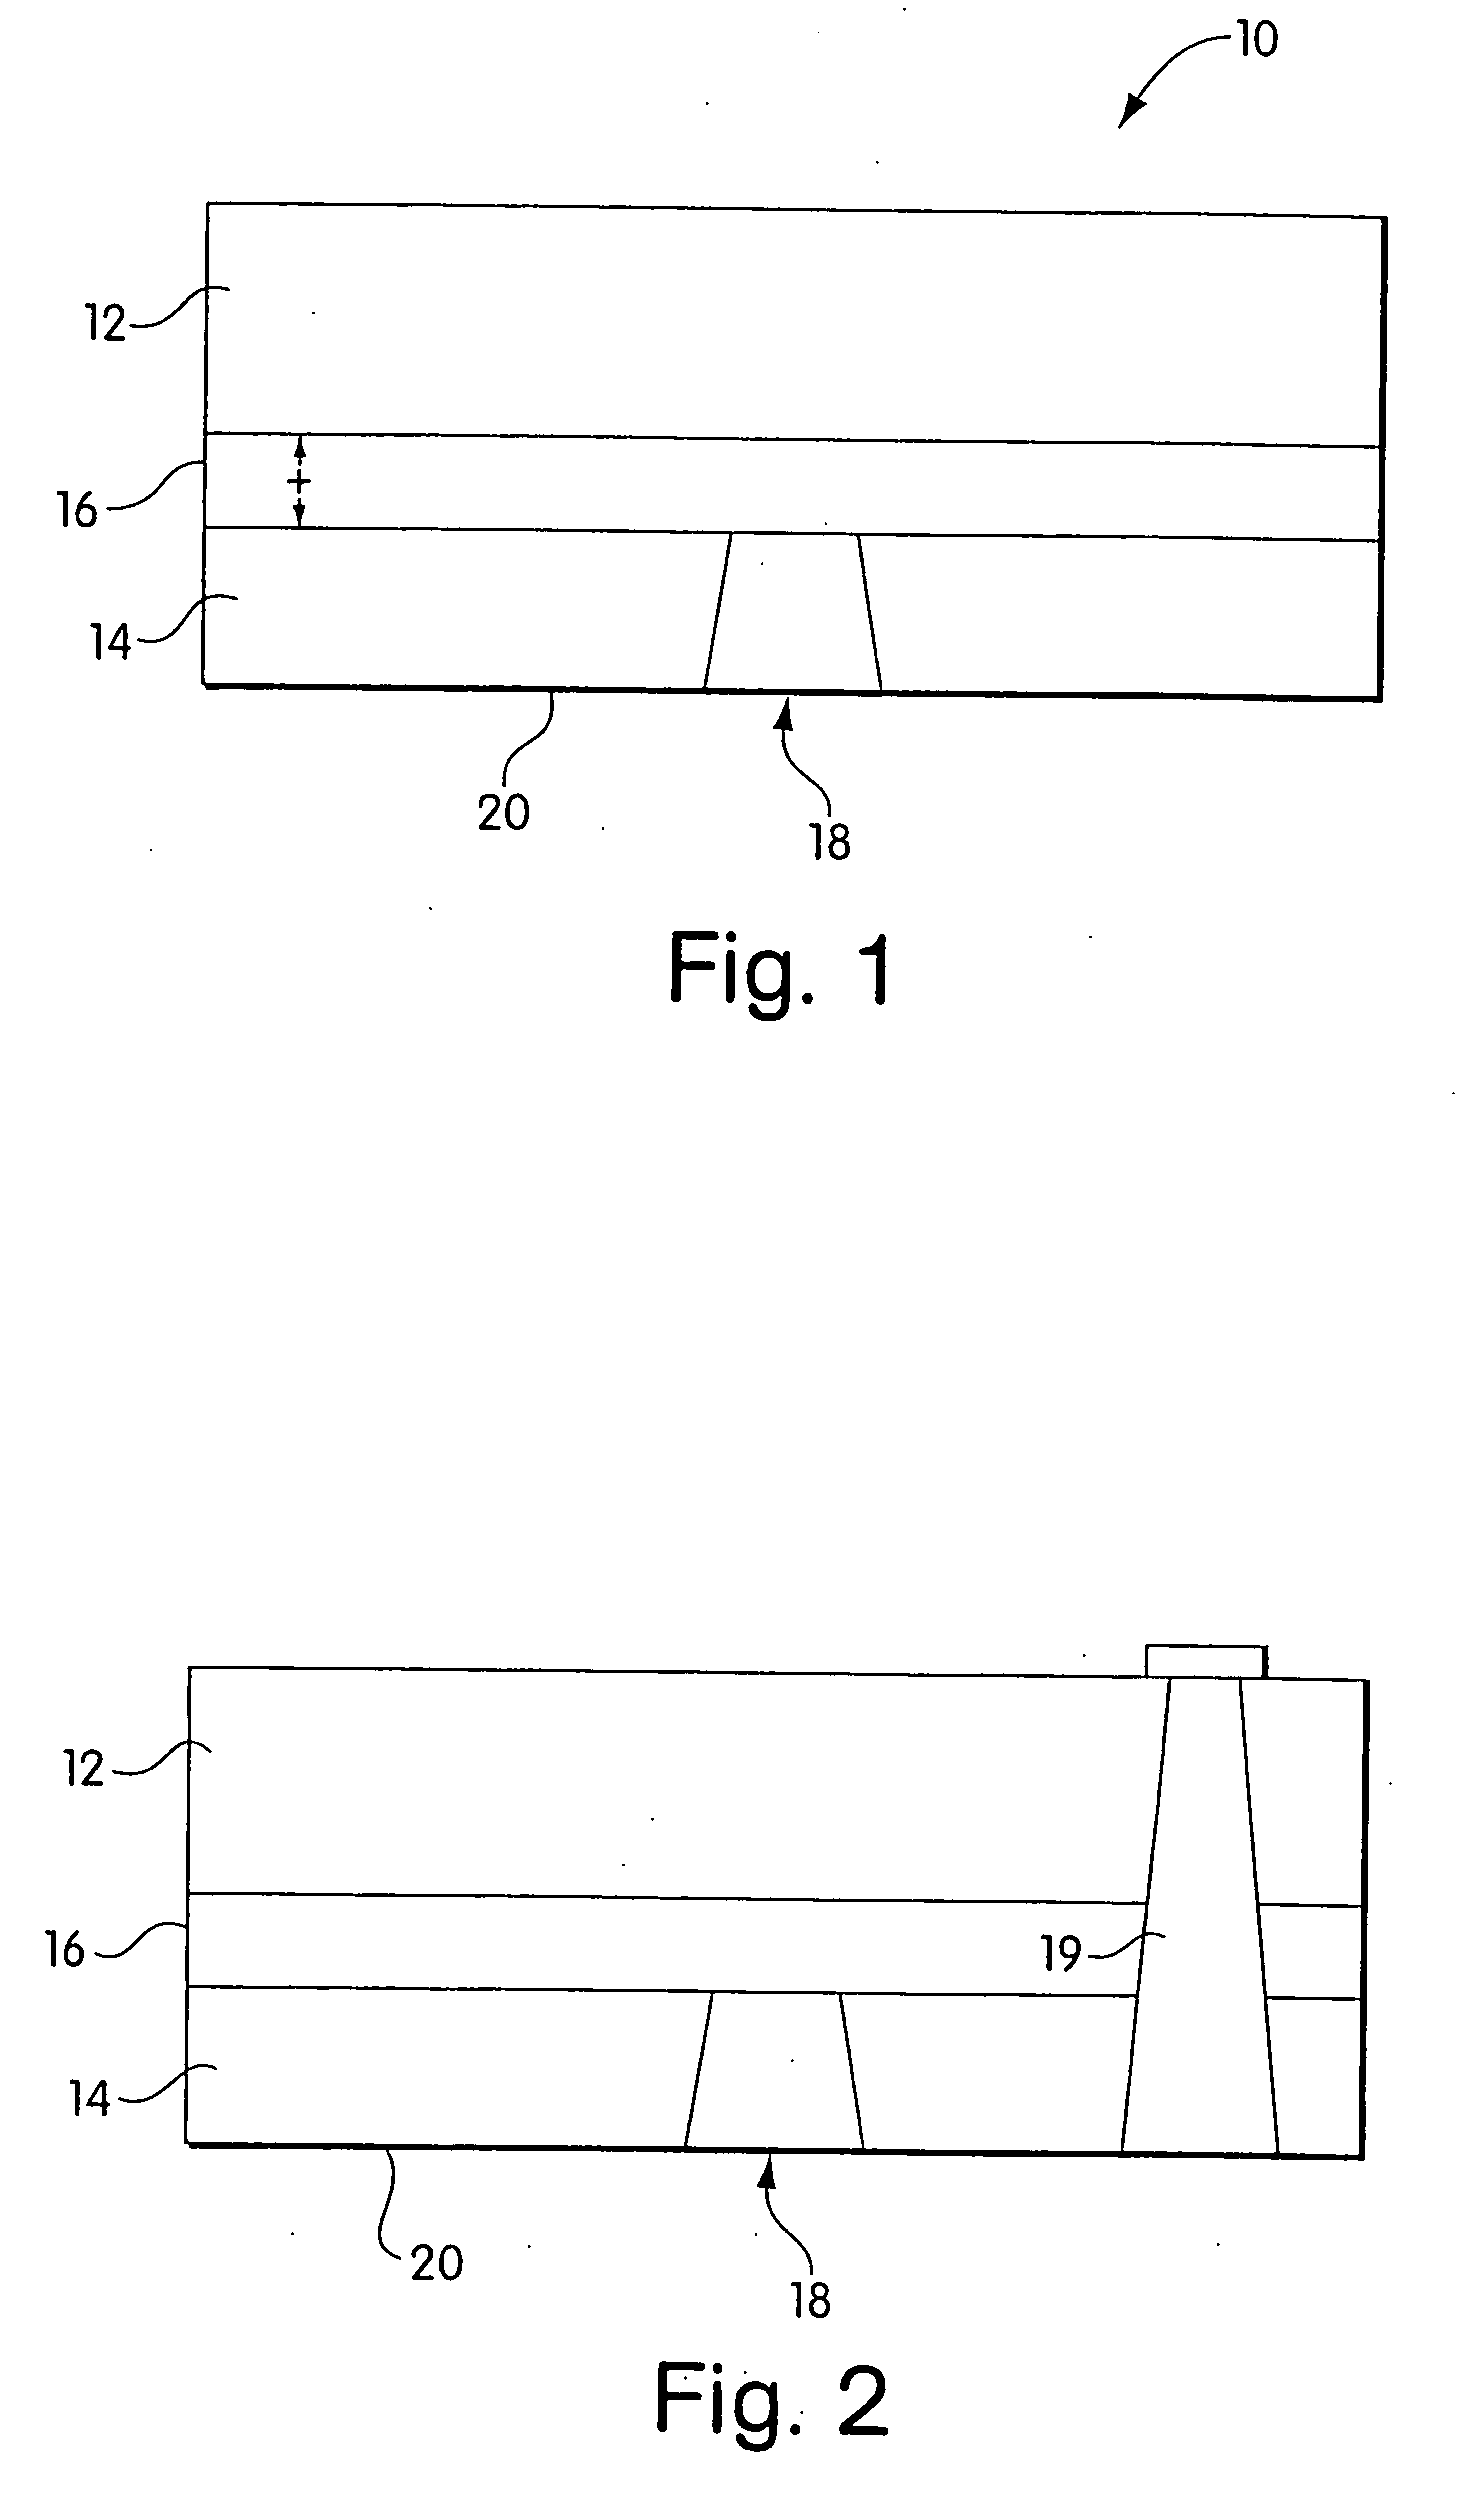 Gallium nitride materials including thermally conductive regions